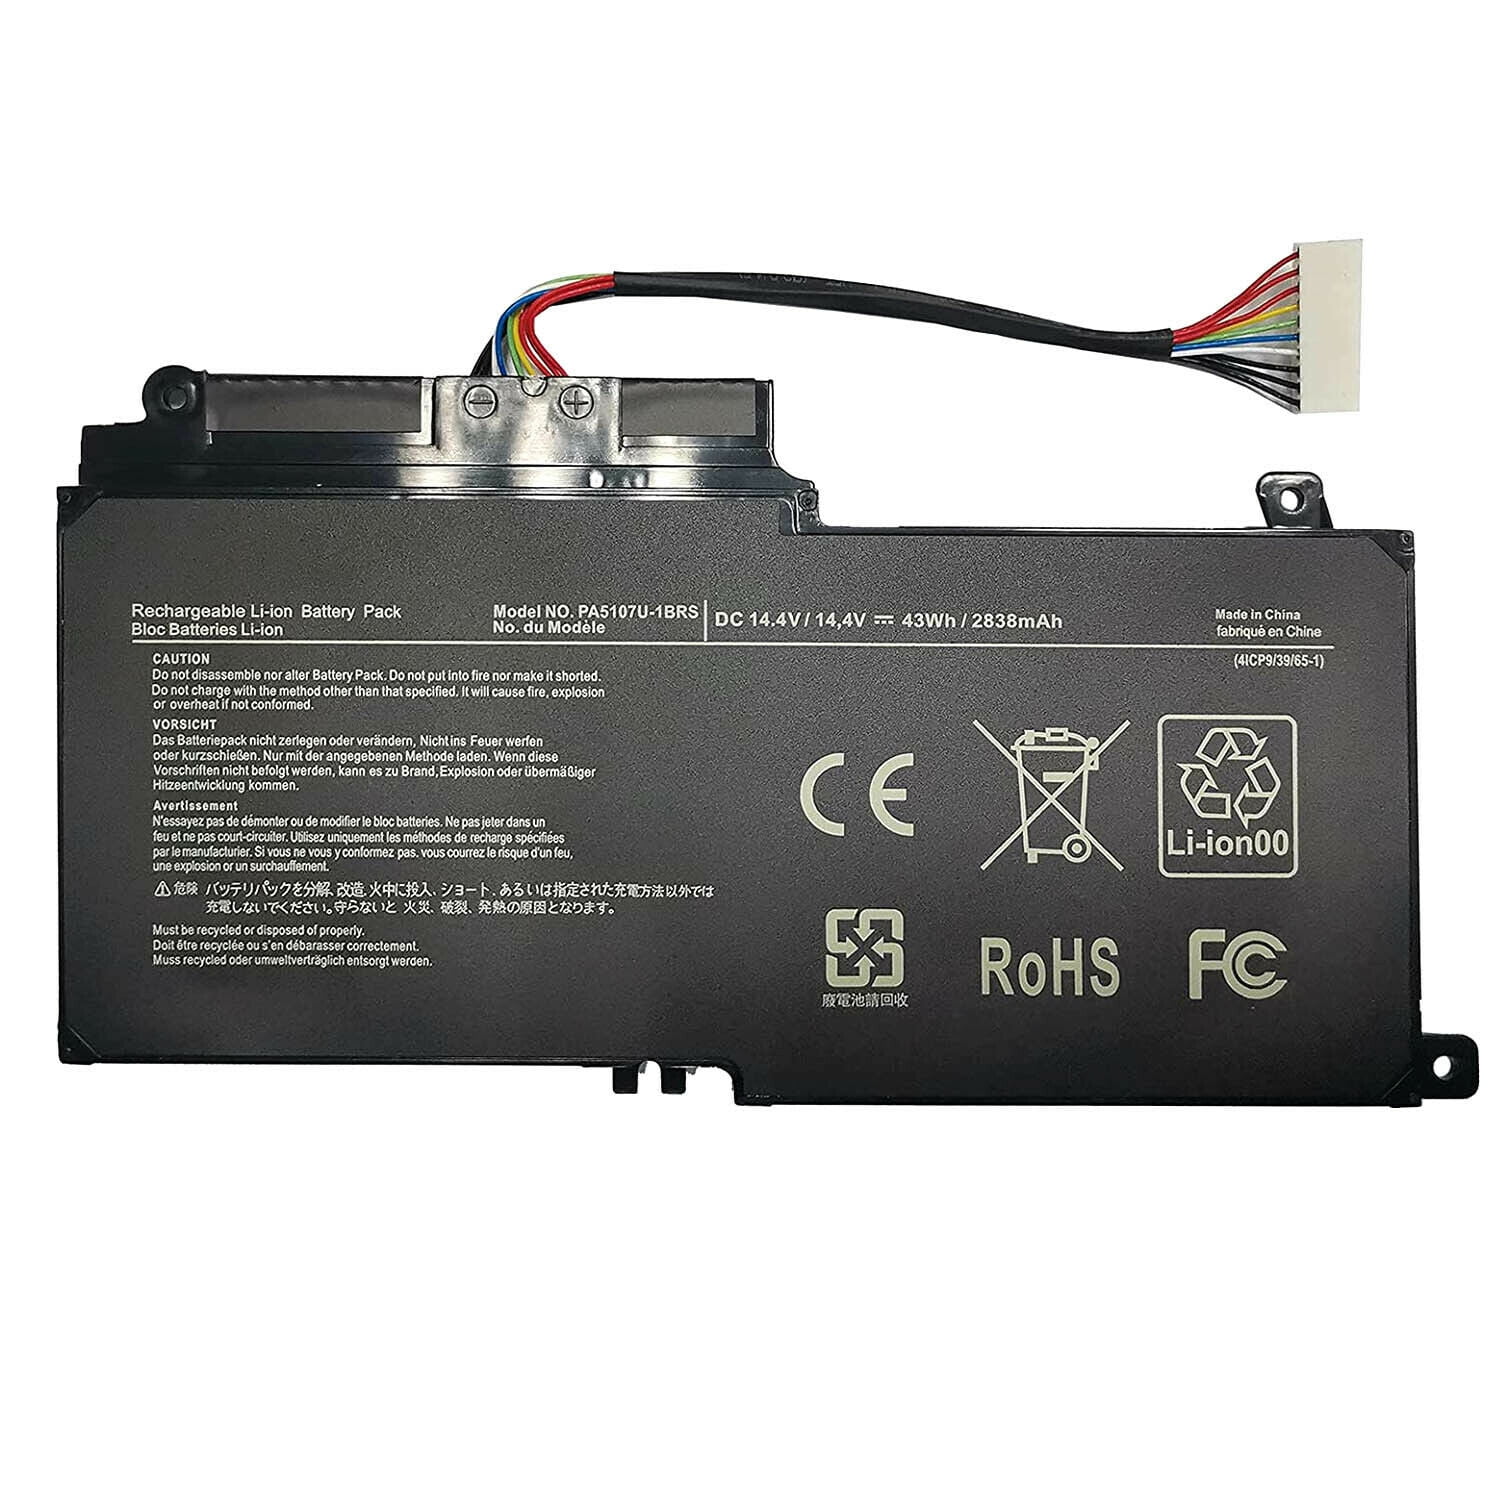 Bred vifte tvetydigheden Touhou Battery for Toshiba Satellite L55-a5226 L55-a5284 L55t-a5290 P55t-a5116  PA5107U - Walmart.com